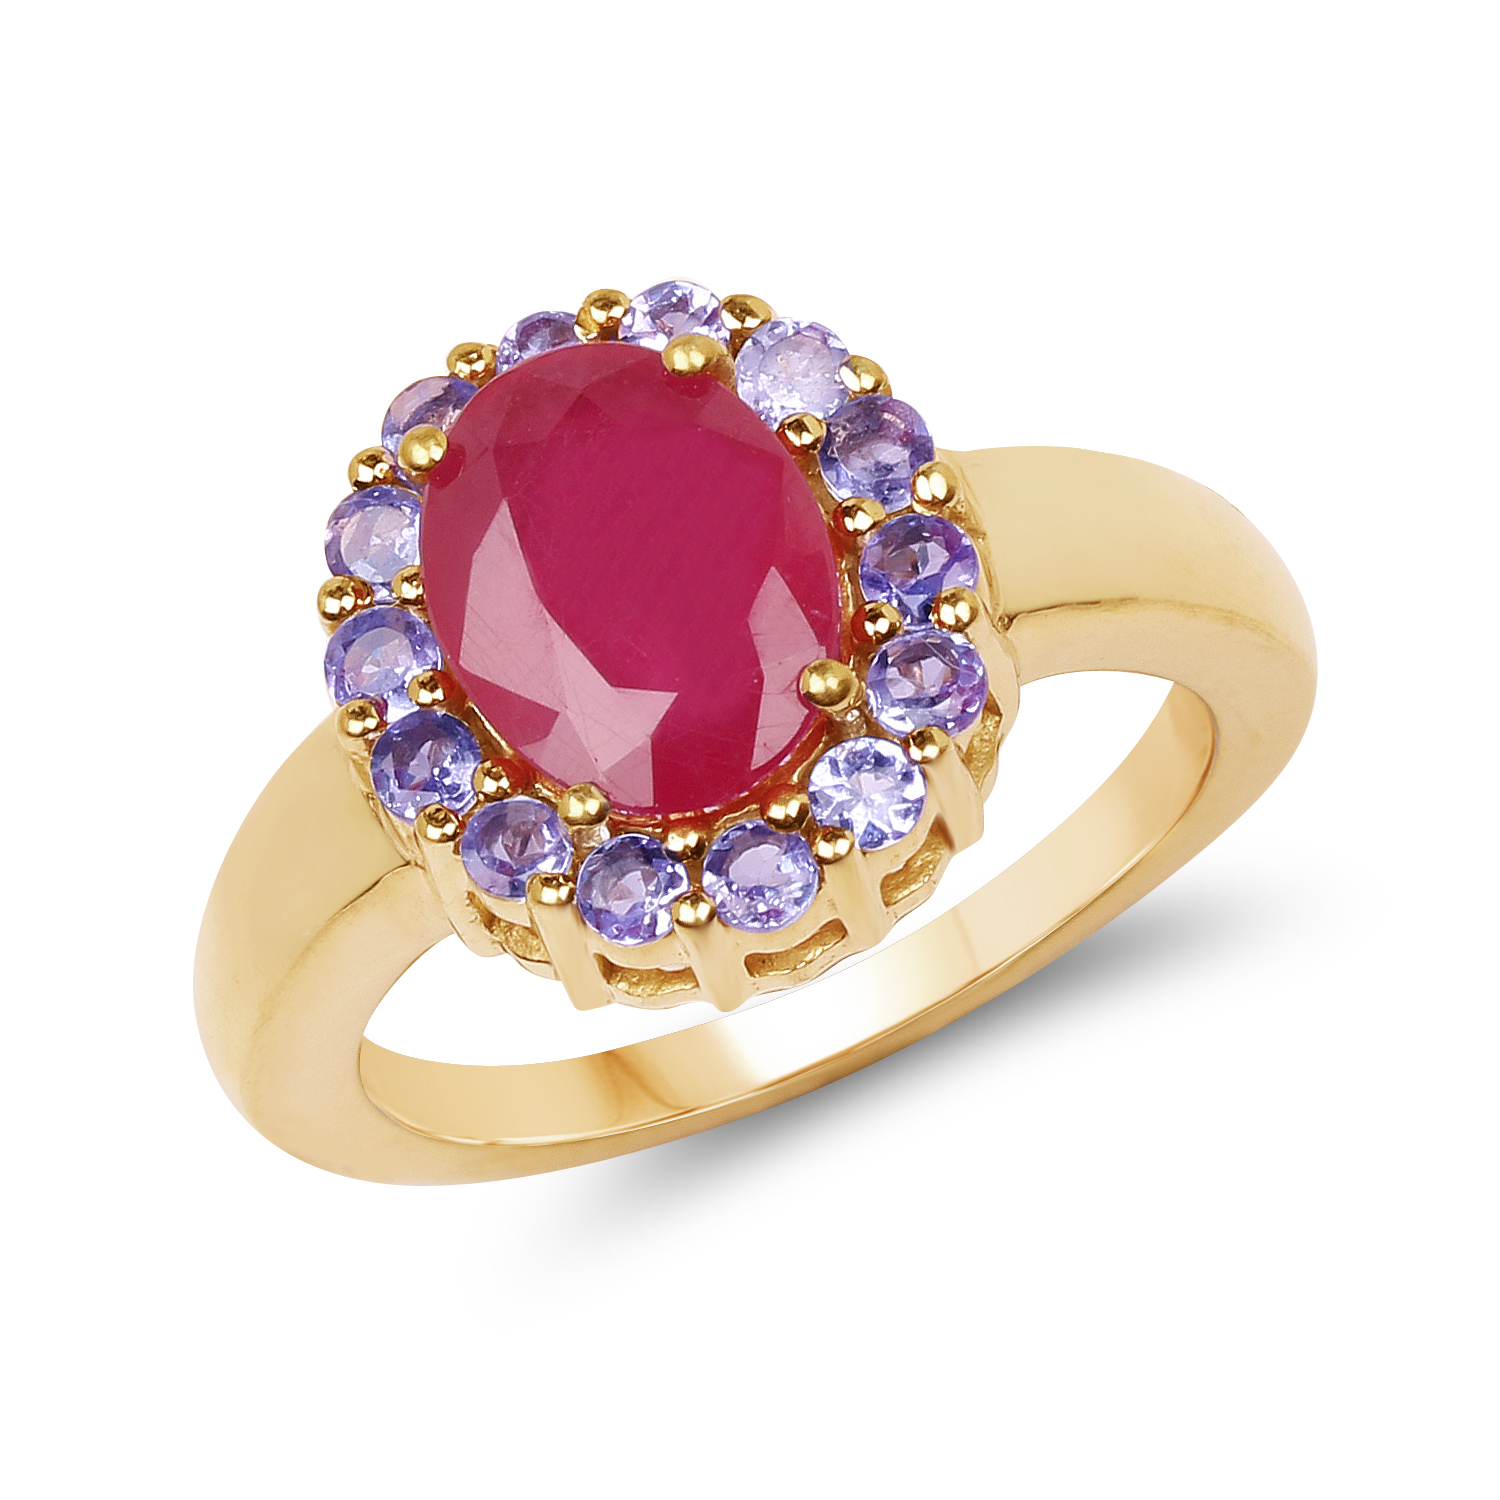 Multiple Sizes 925 Sterling Silver 14K Yellow Gold Plated Glass Filled Ruby and Tanzanite Ring 2.79 Carat